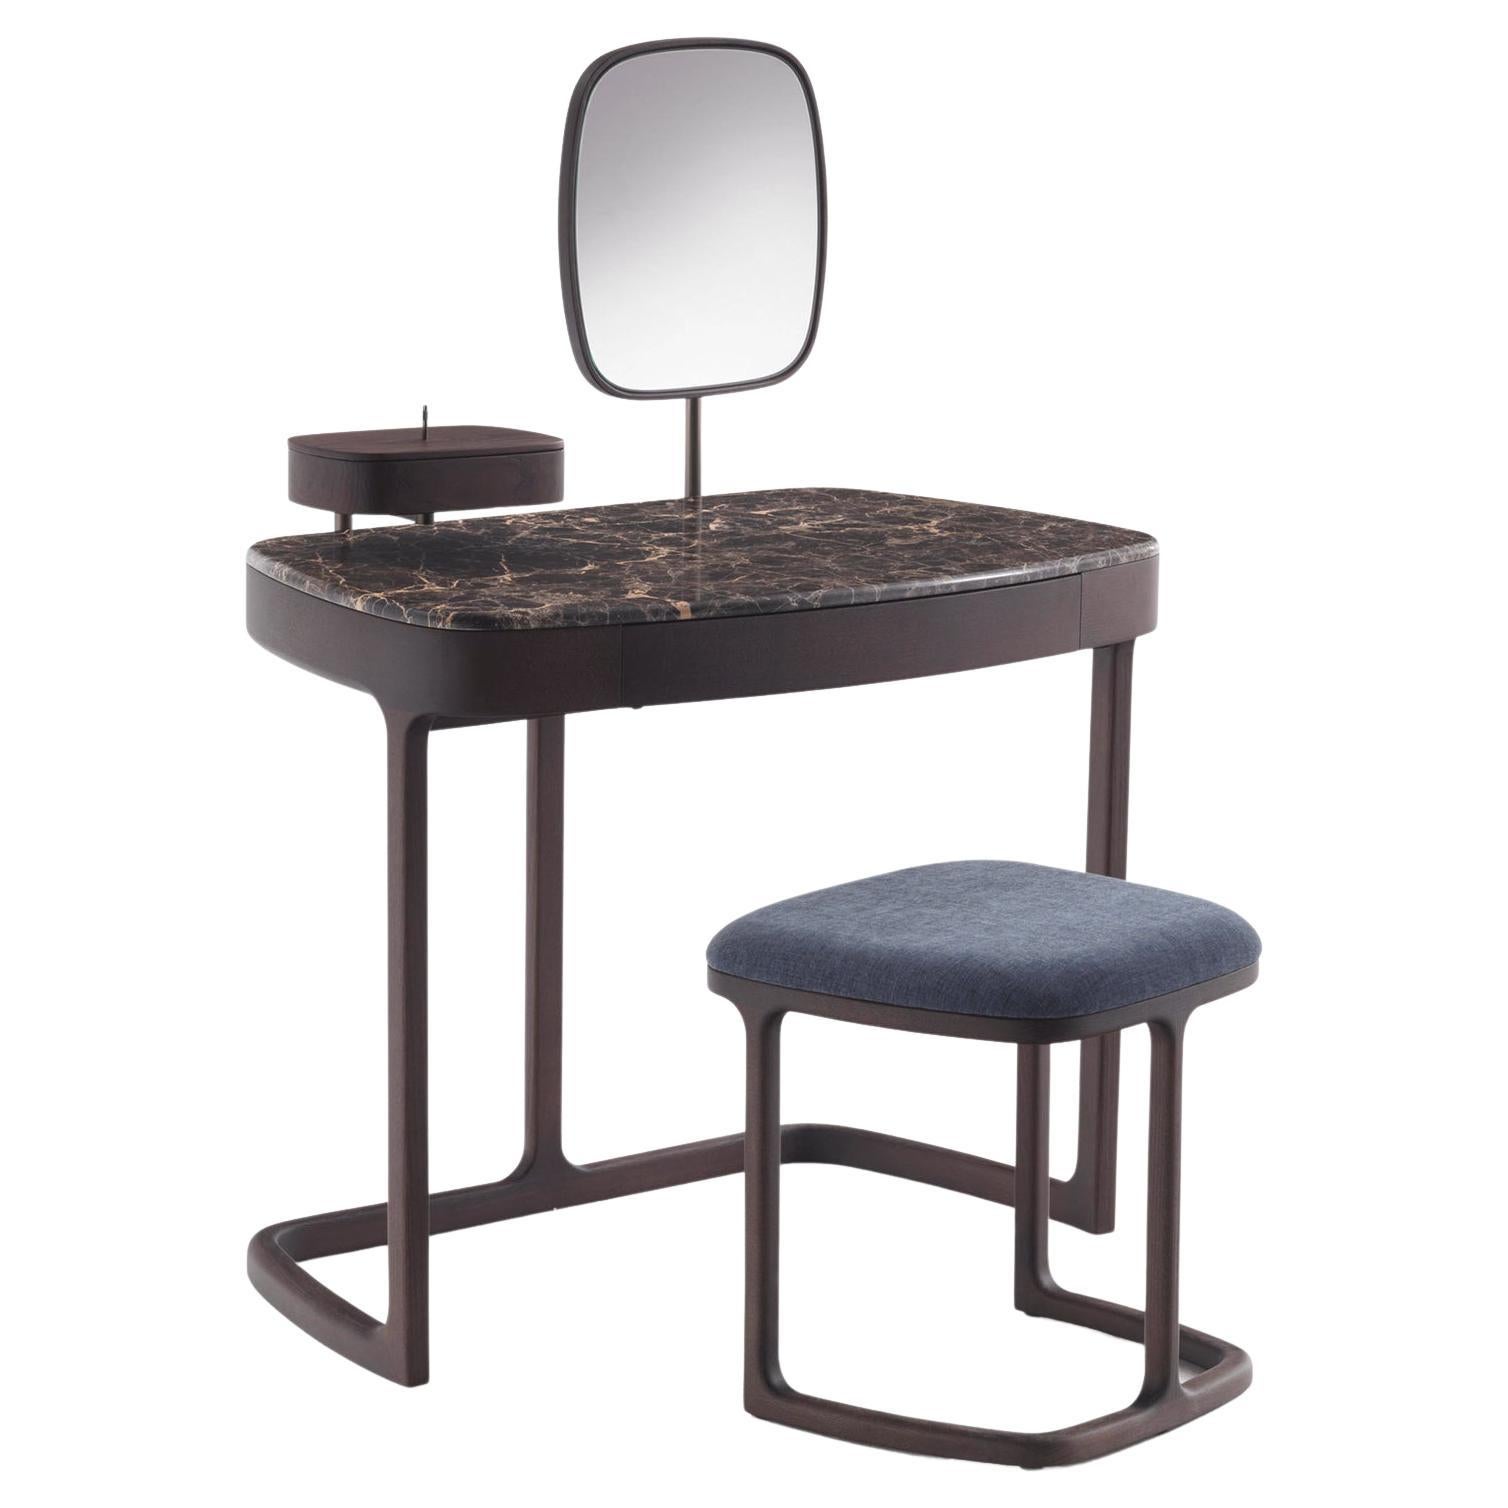 Make-Up Ash Stained Set Coiffeuse and Stool For Sale